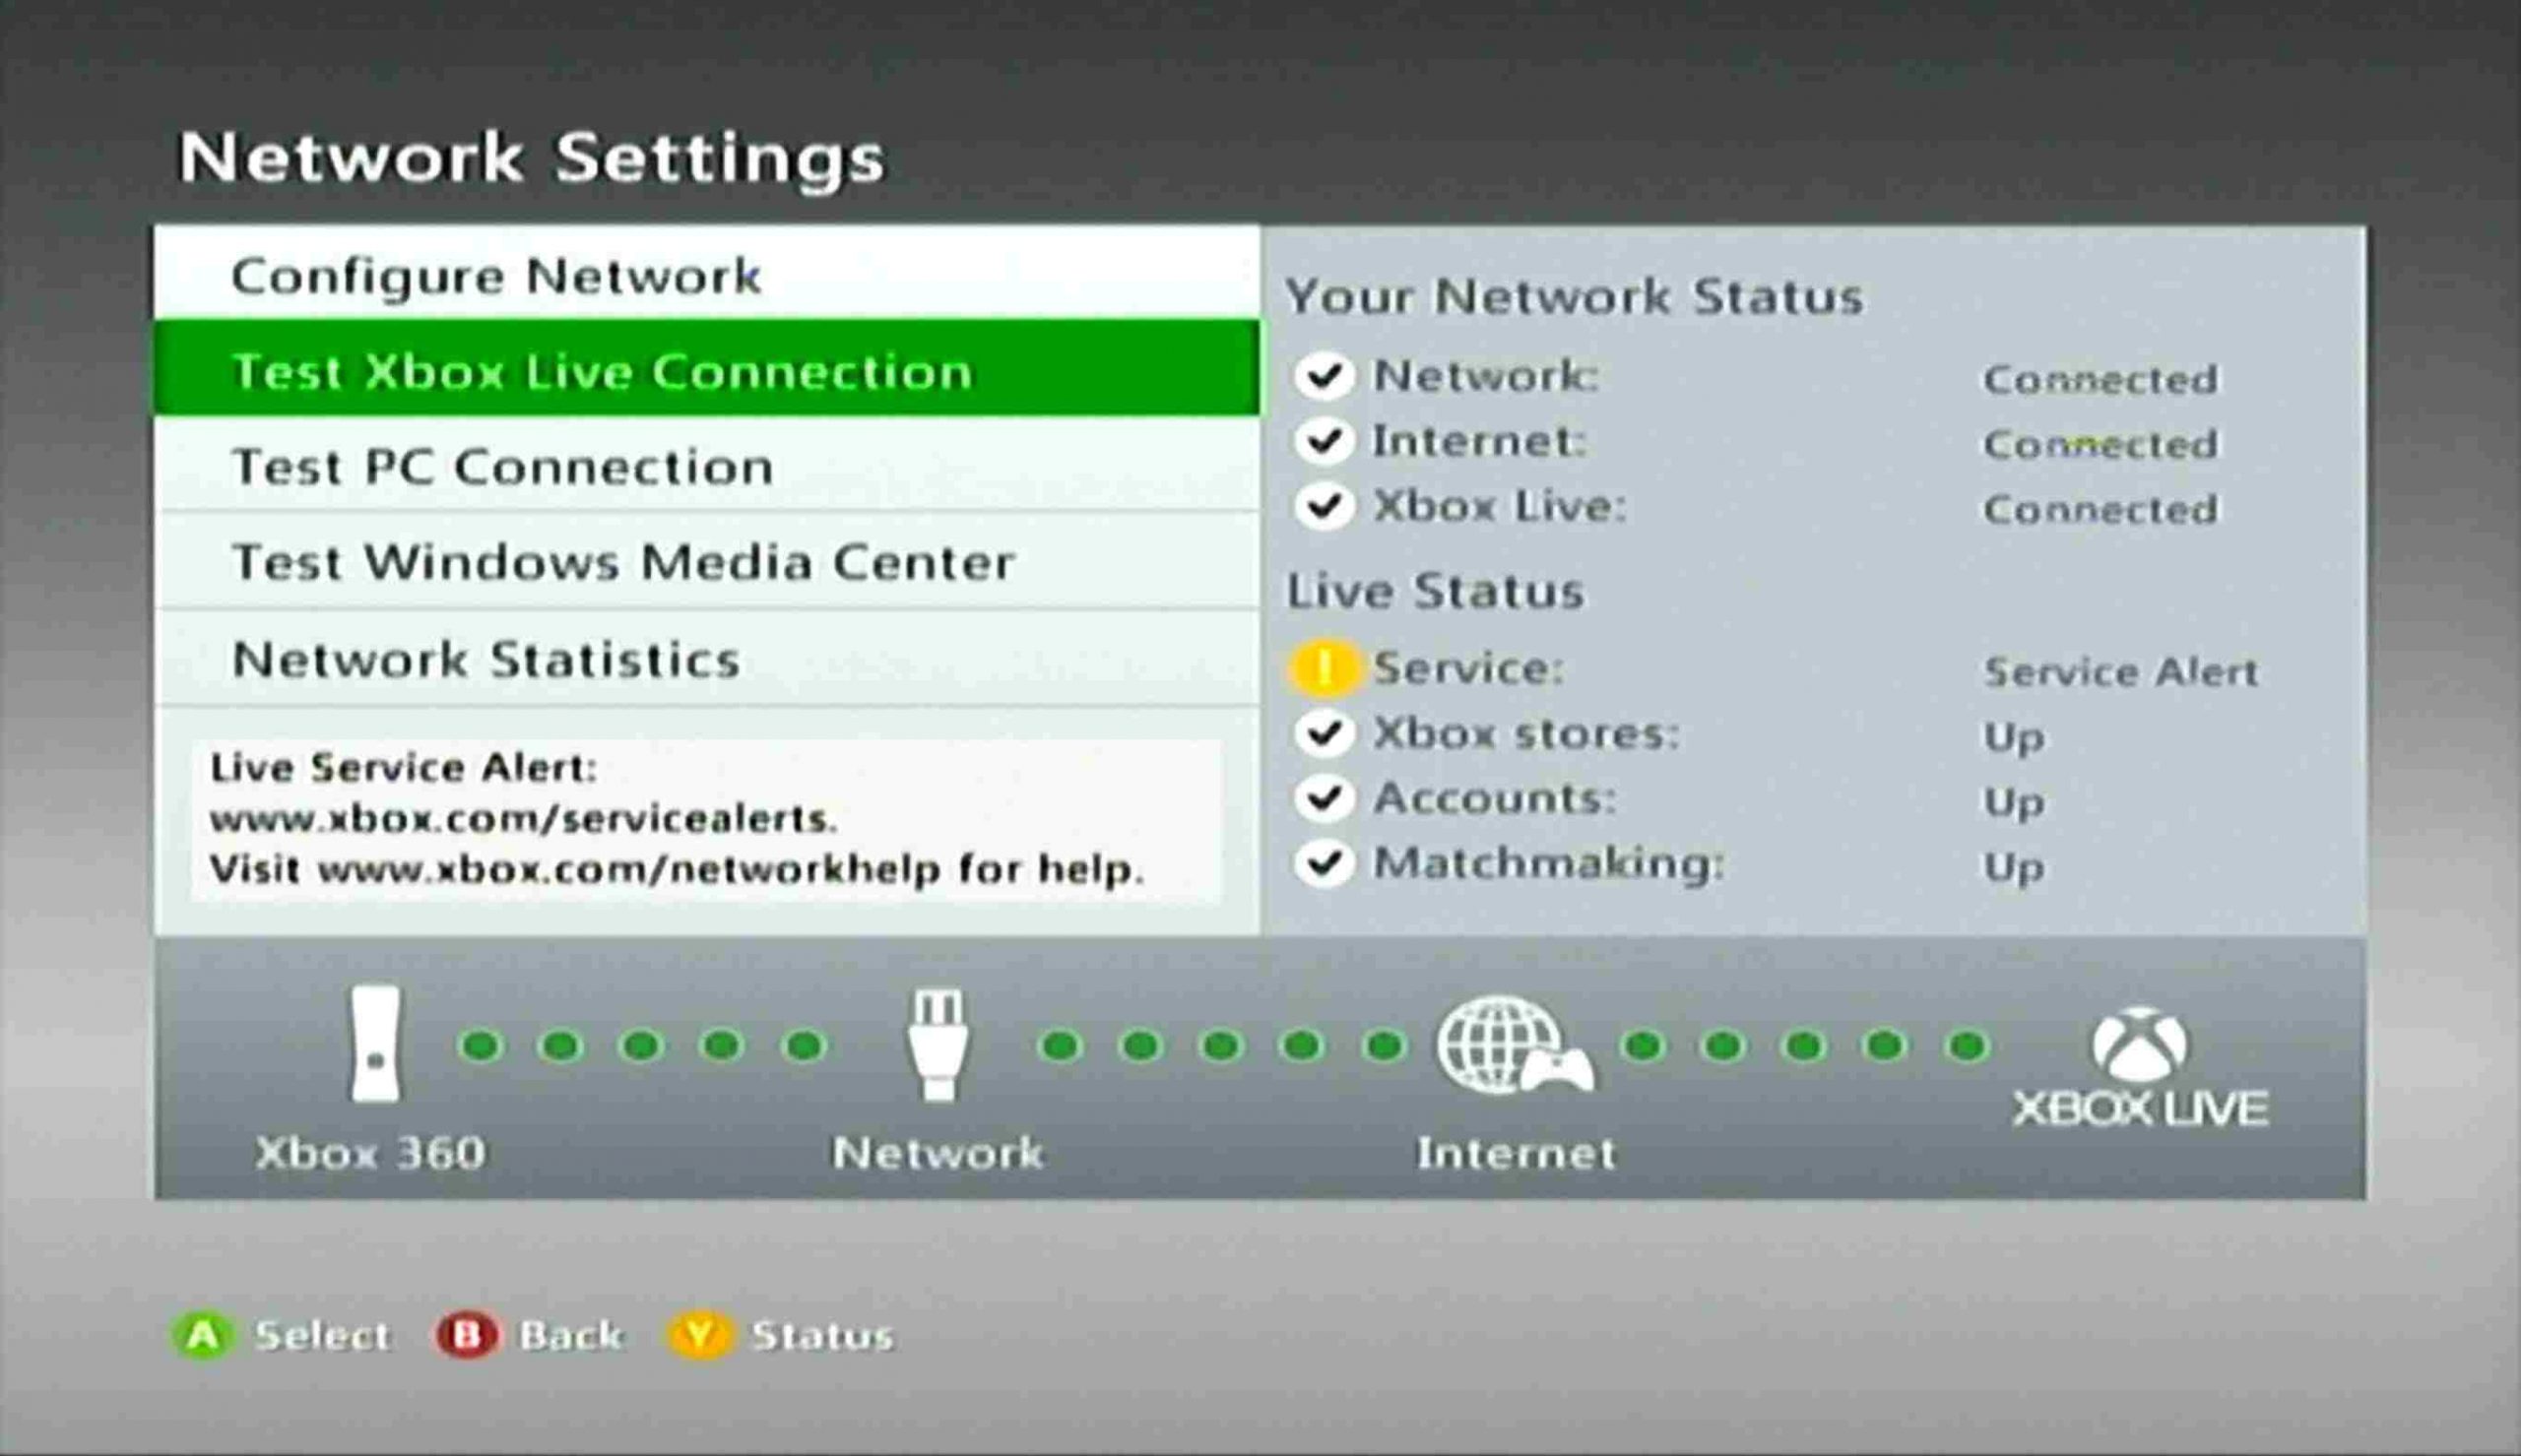 Tap Test Xbox Live Connection to update Xbox 360